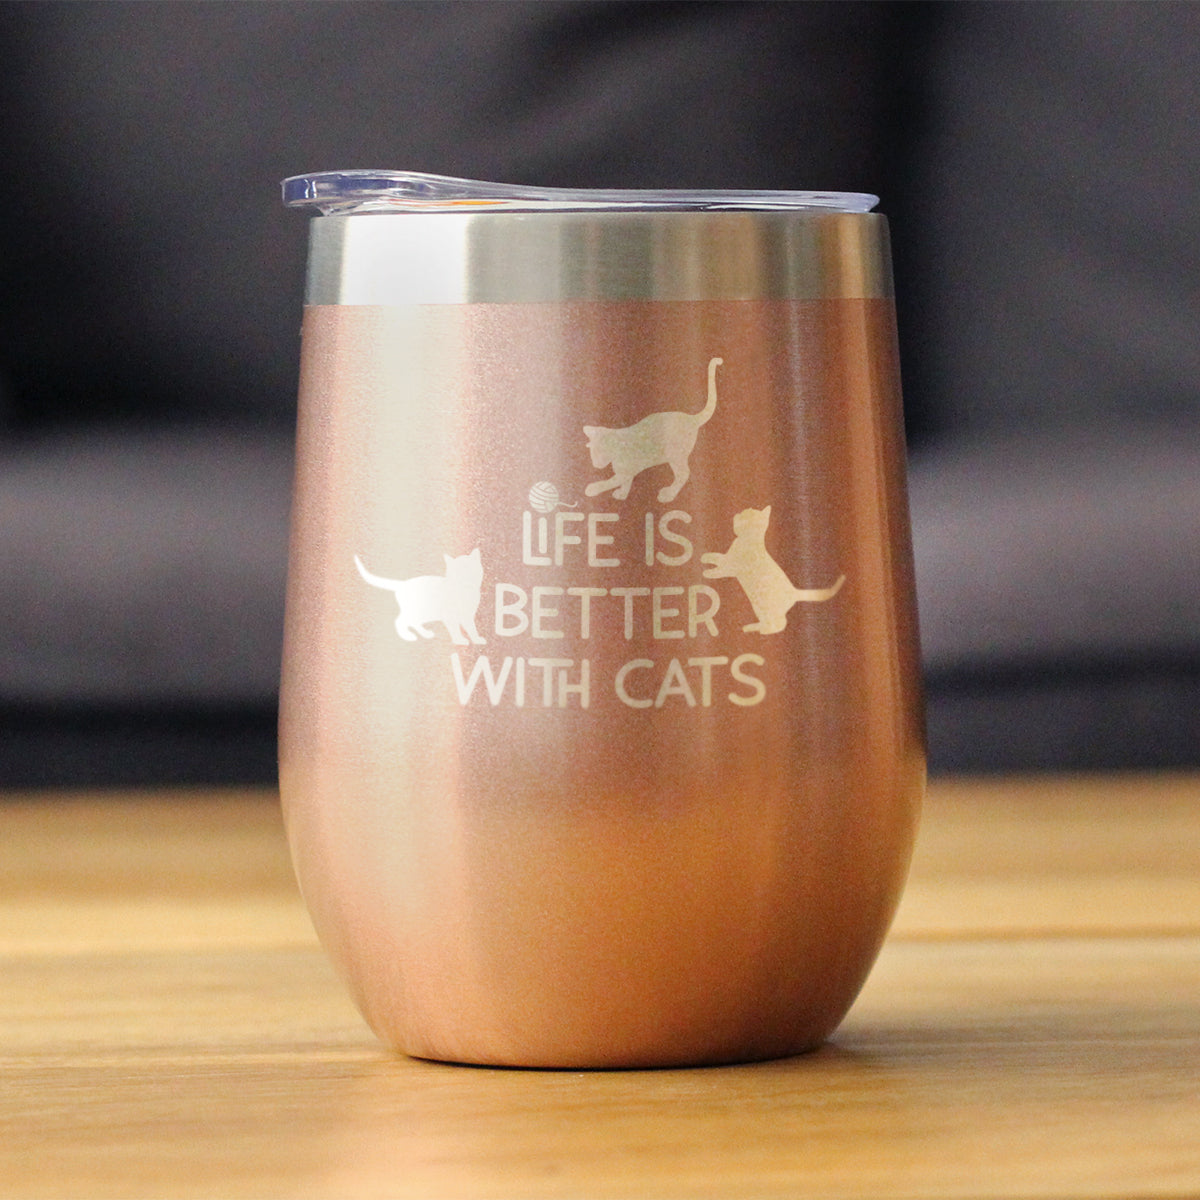 Life is Better With Cats - Wine Tumbler Glass with Sliding Lid - Stainless Steel Travel Mug - Cat Gifts for Women and Men